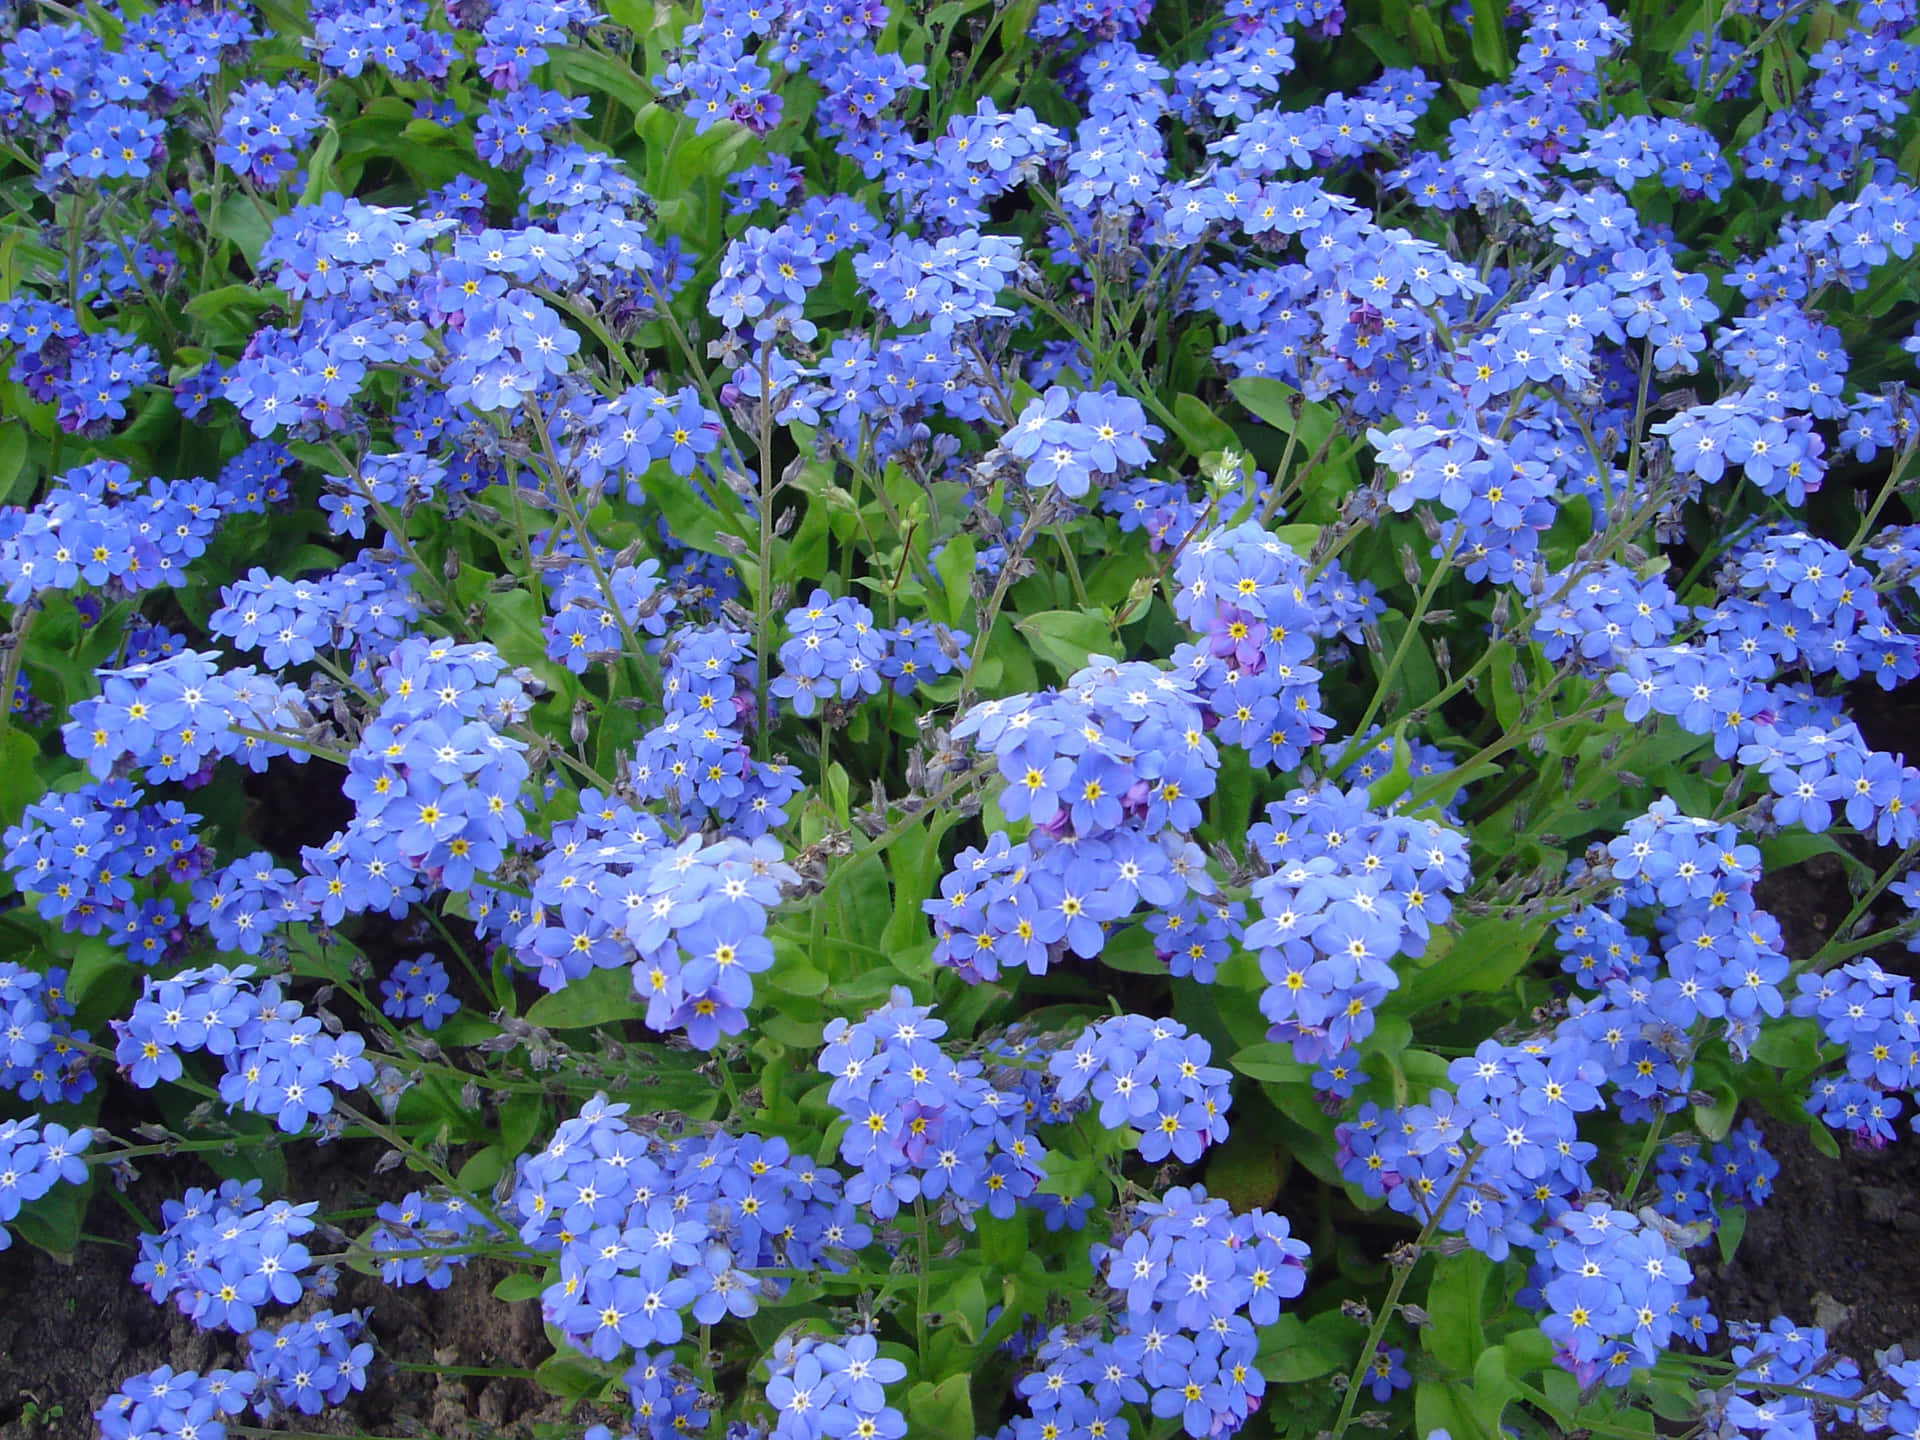 Add an everlasting touch to your garden with the vibrant Forget-me-not flower.